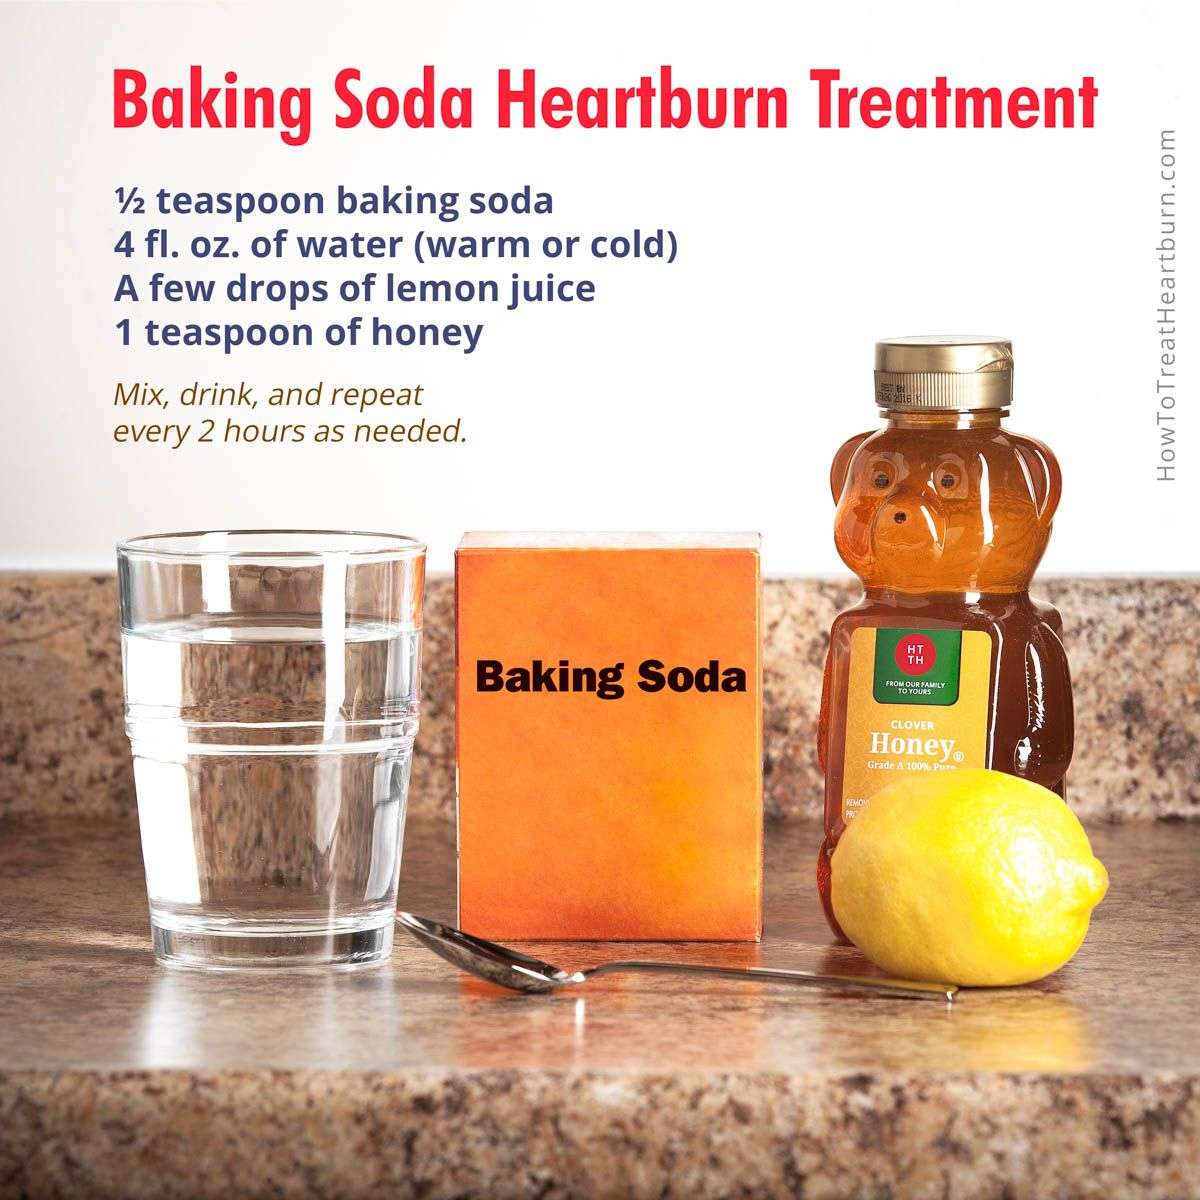 How To Use Baking Soda For Heartburn Relief With Recipes (With images ...